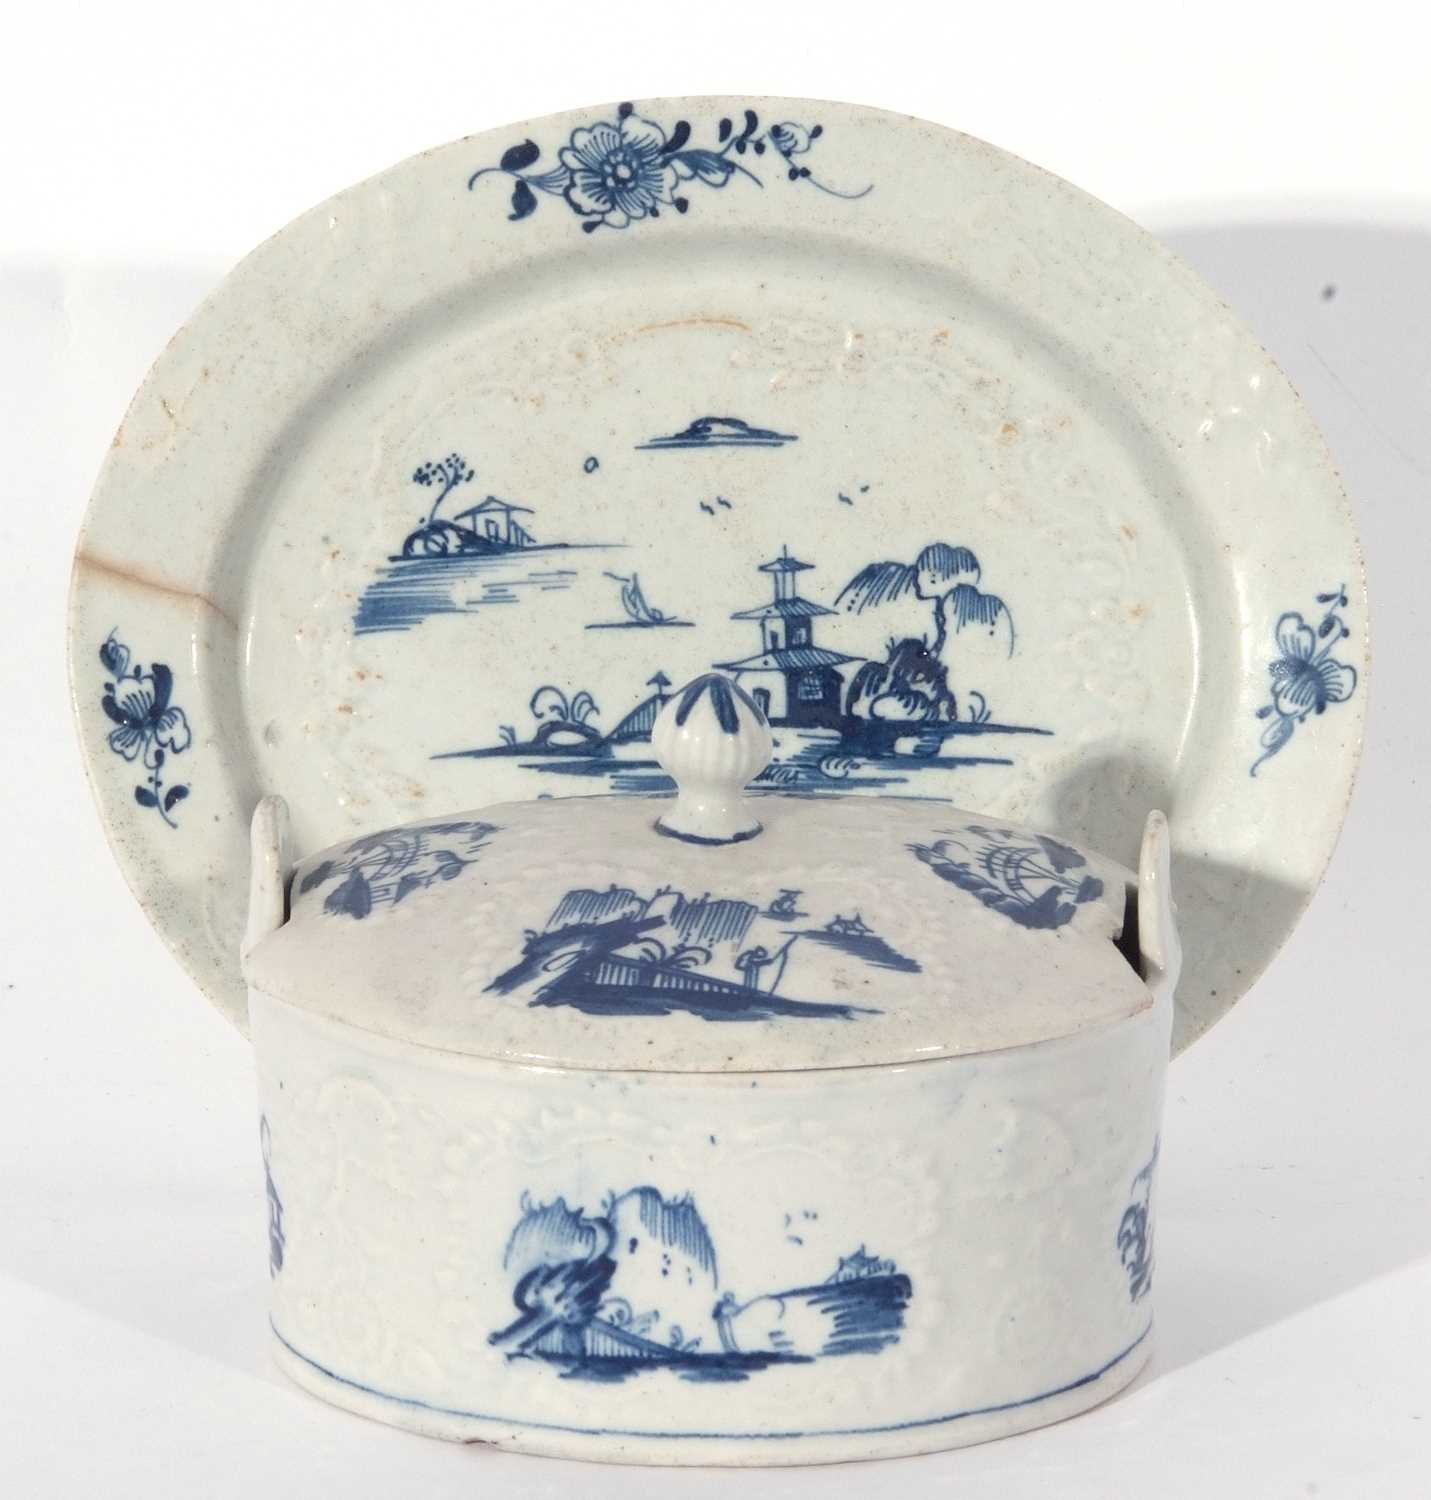 Lowestoft porcelain butter tub, cover and stand circa 1765, the tub moulded with flowers enclosing - Image 2 of 14